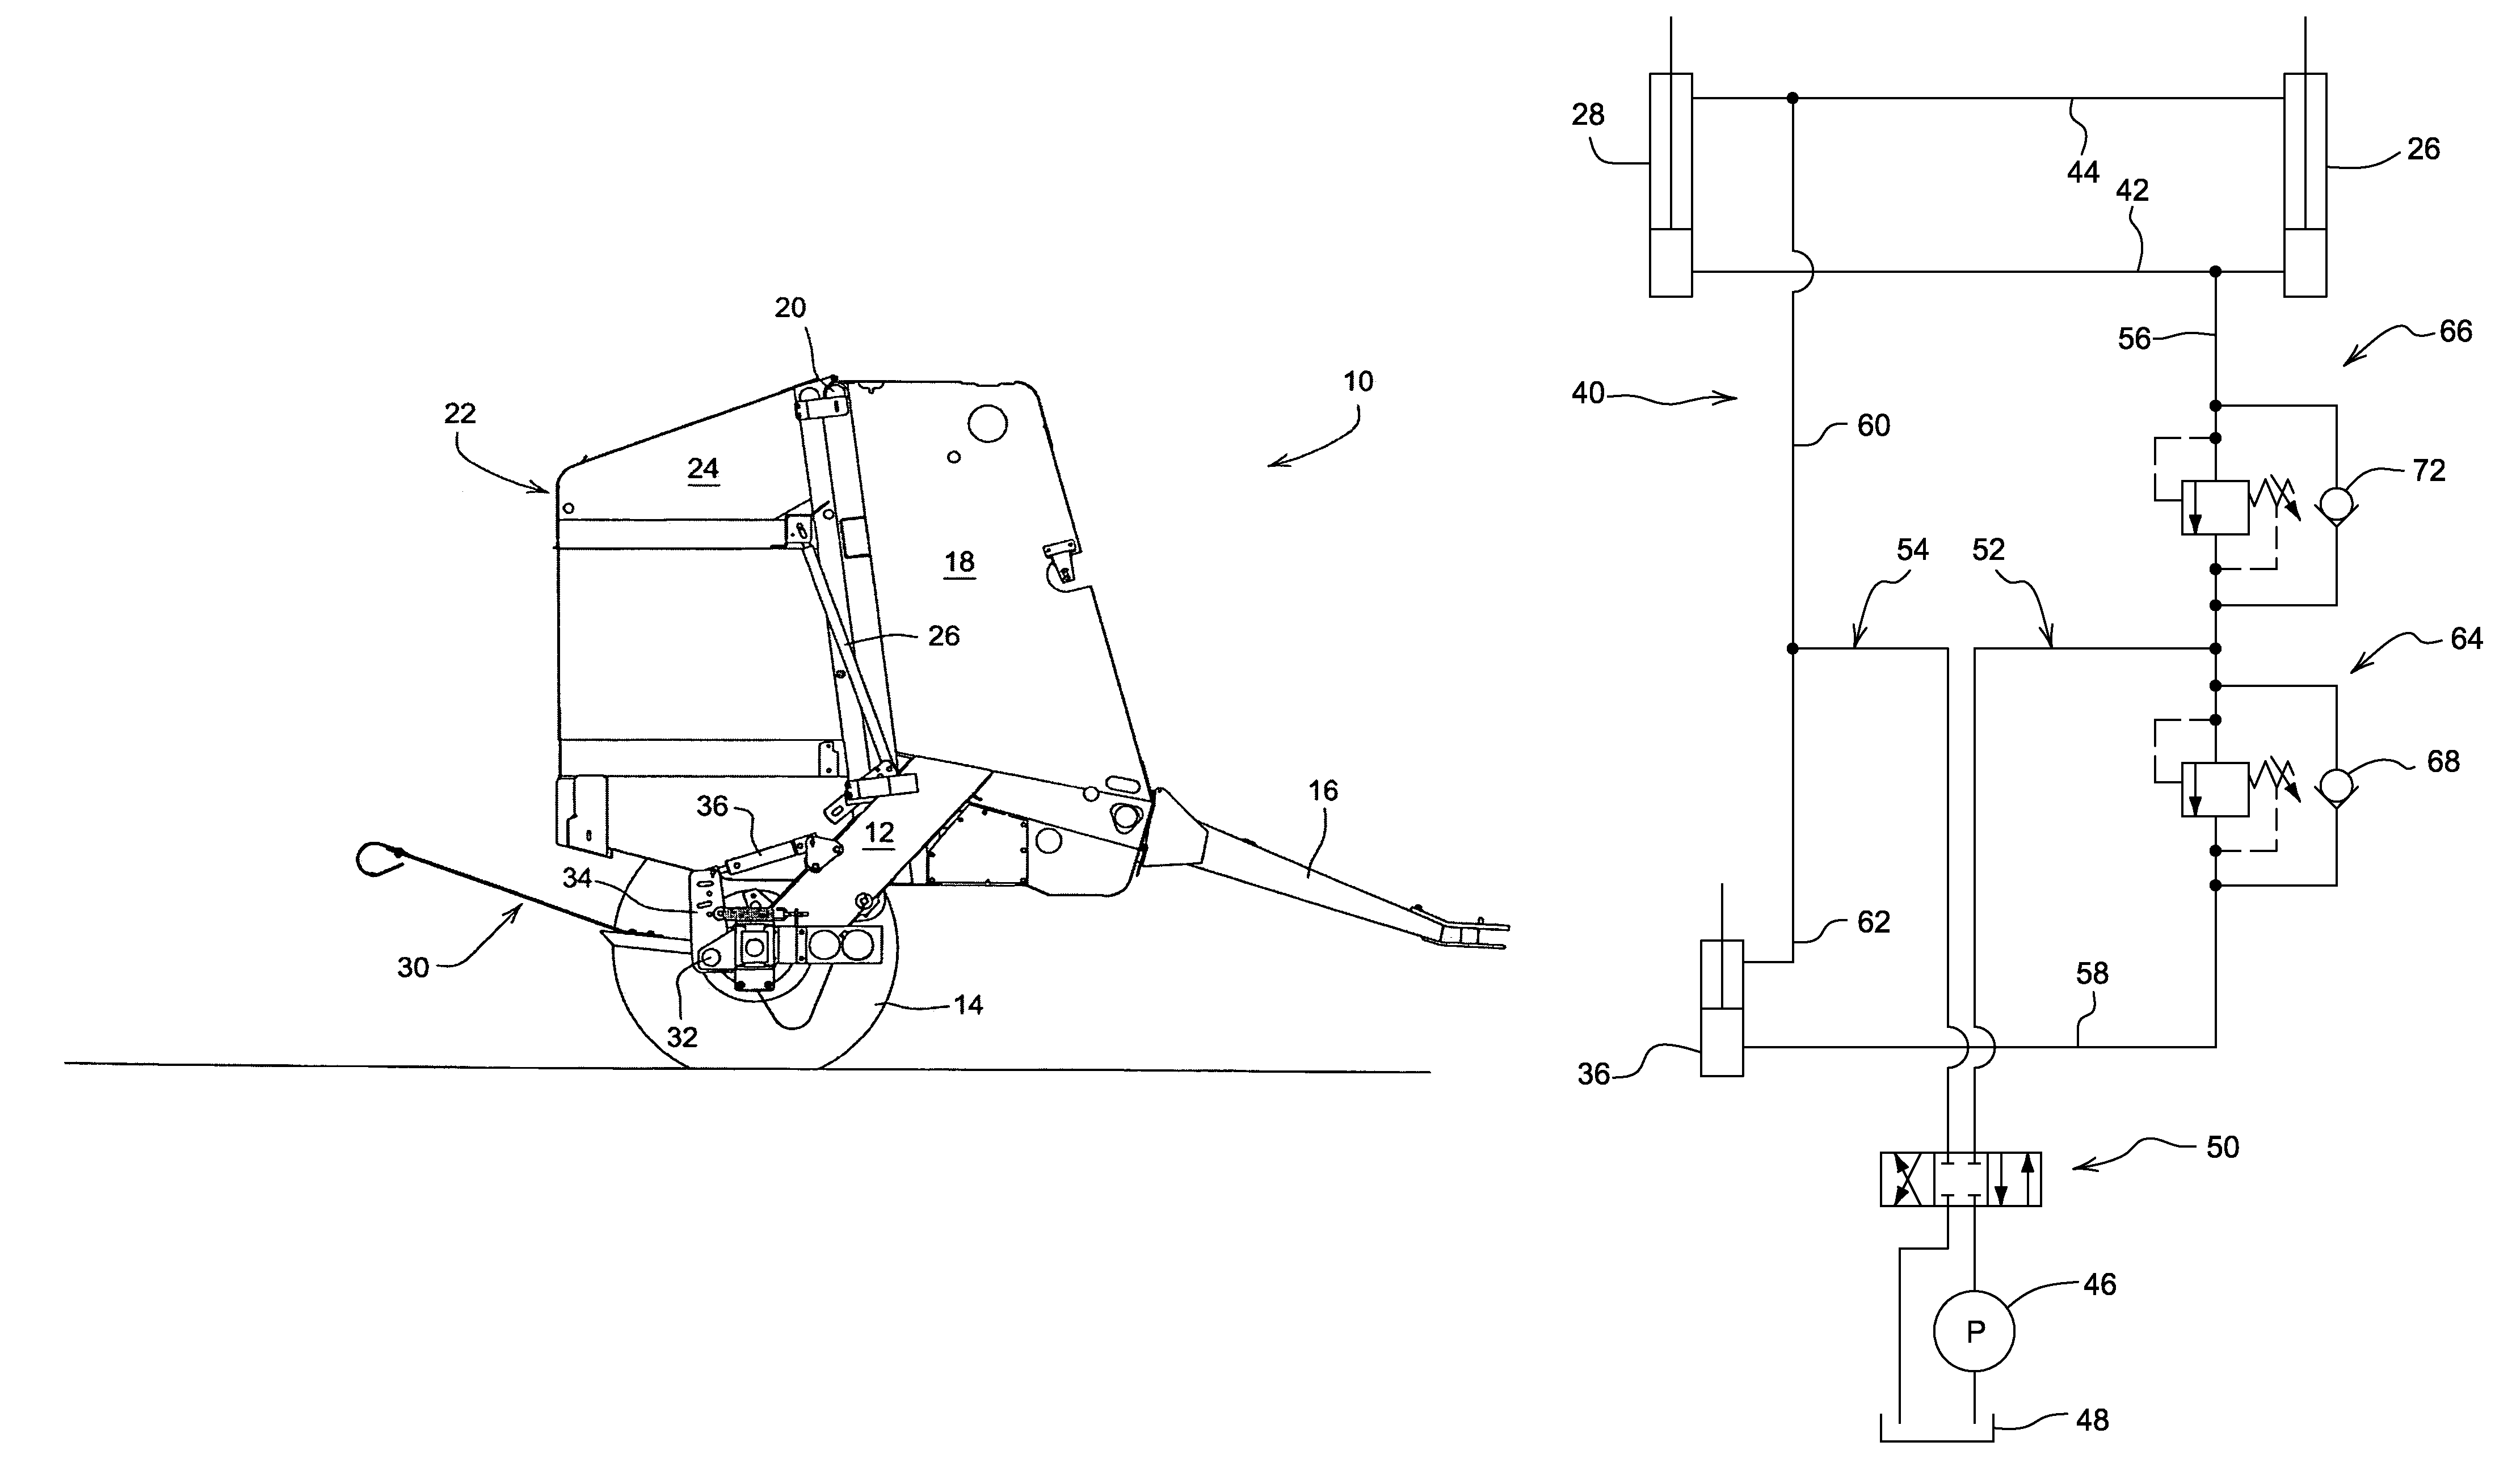 Sequence and timing control for large round baler ejection device